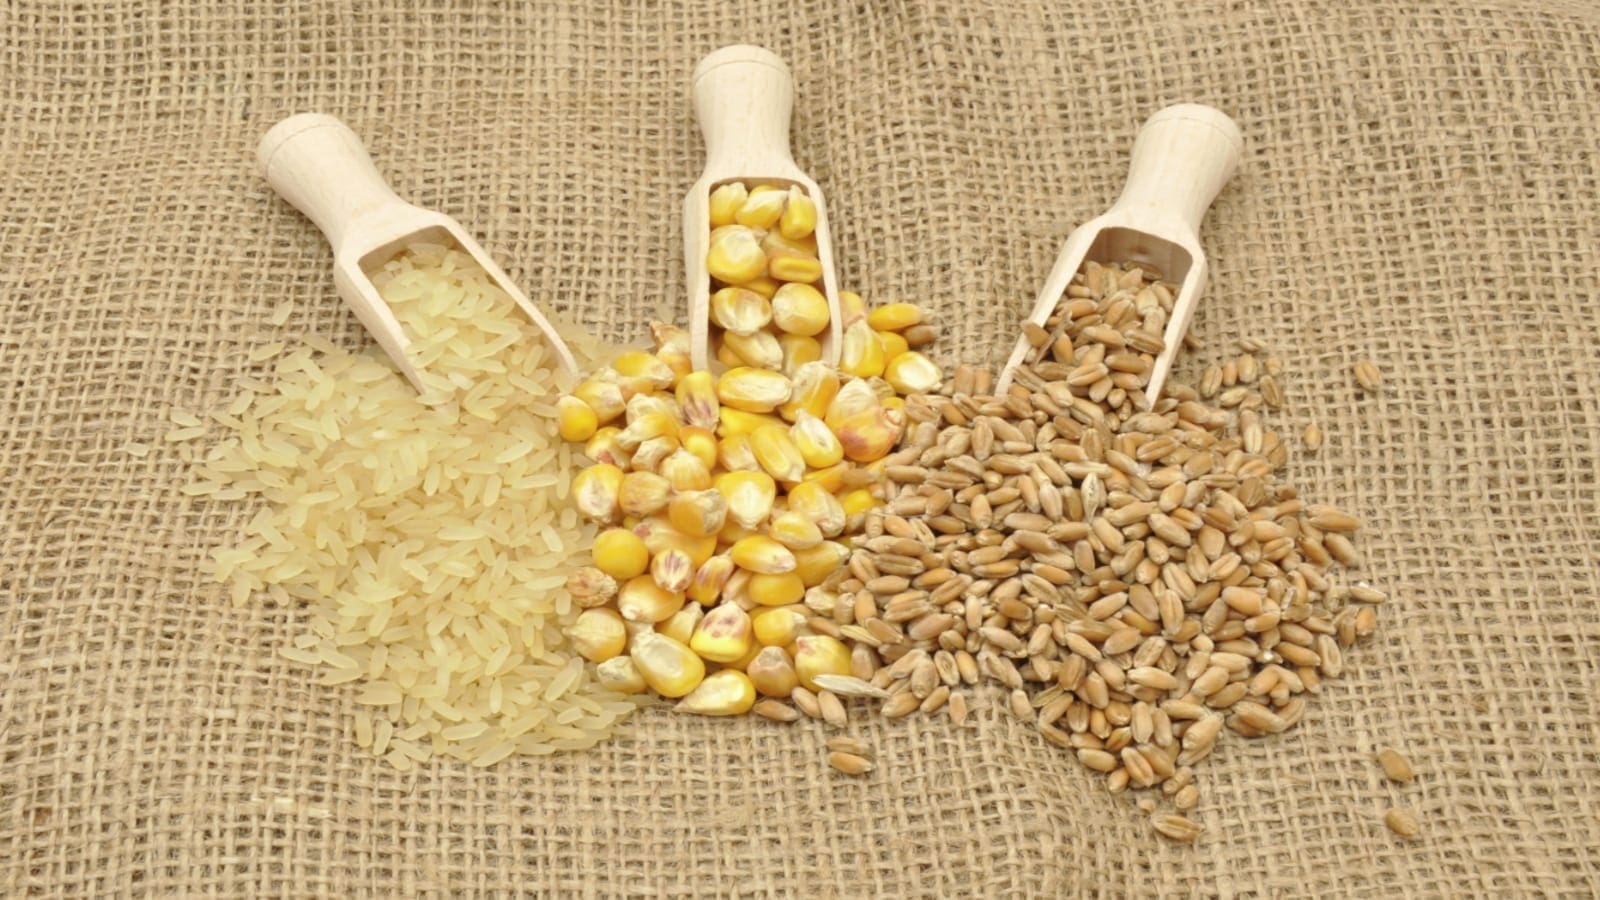 Kenya’s demand for grains to surpass local production forcing reliance on imports